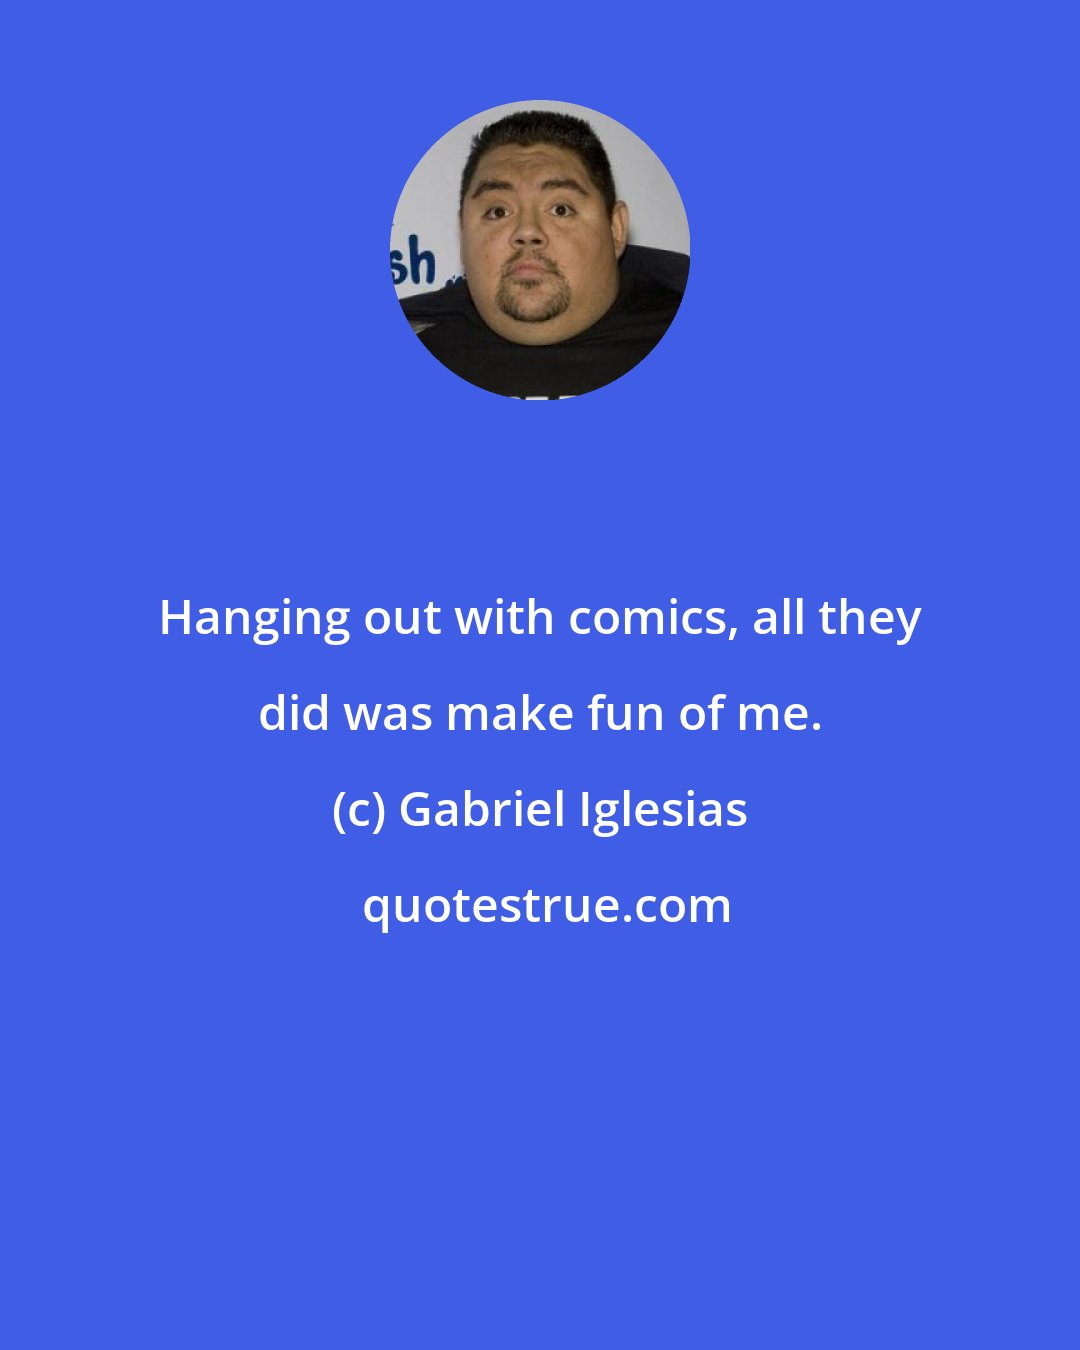 Gabriel Iglesias: Hanging out with comics, all they did was make fun of me.